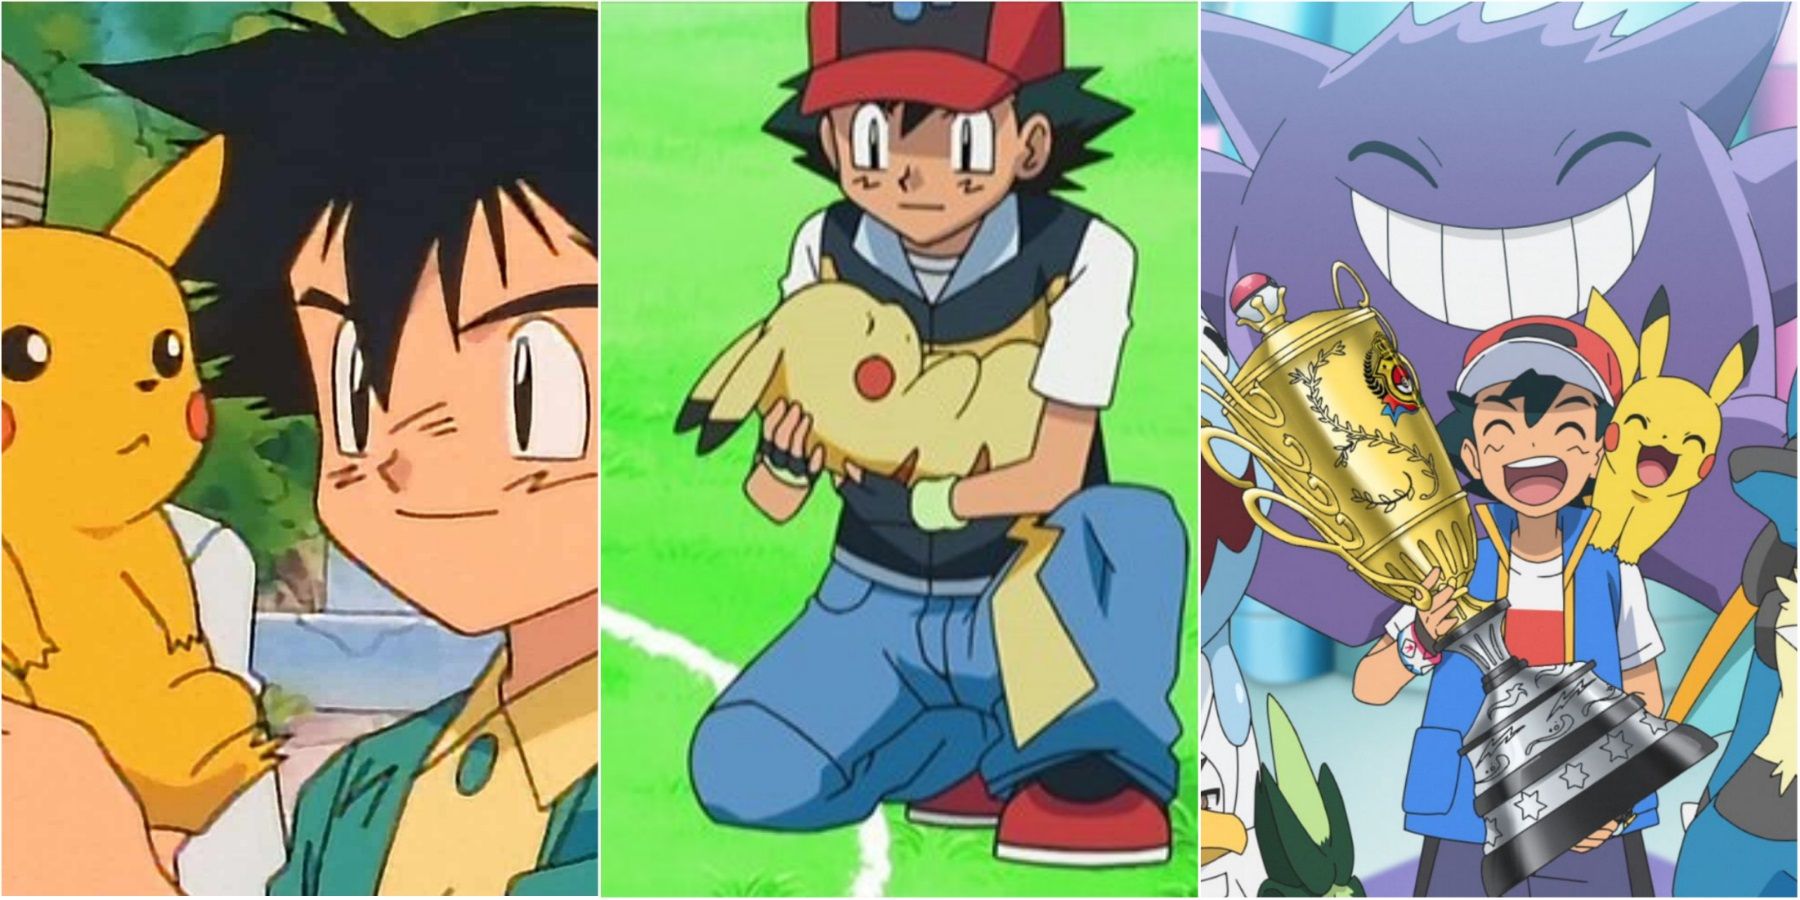 Next Pokémon Anime Series Drops Ash and Pikachu for New Protagonists